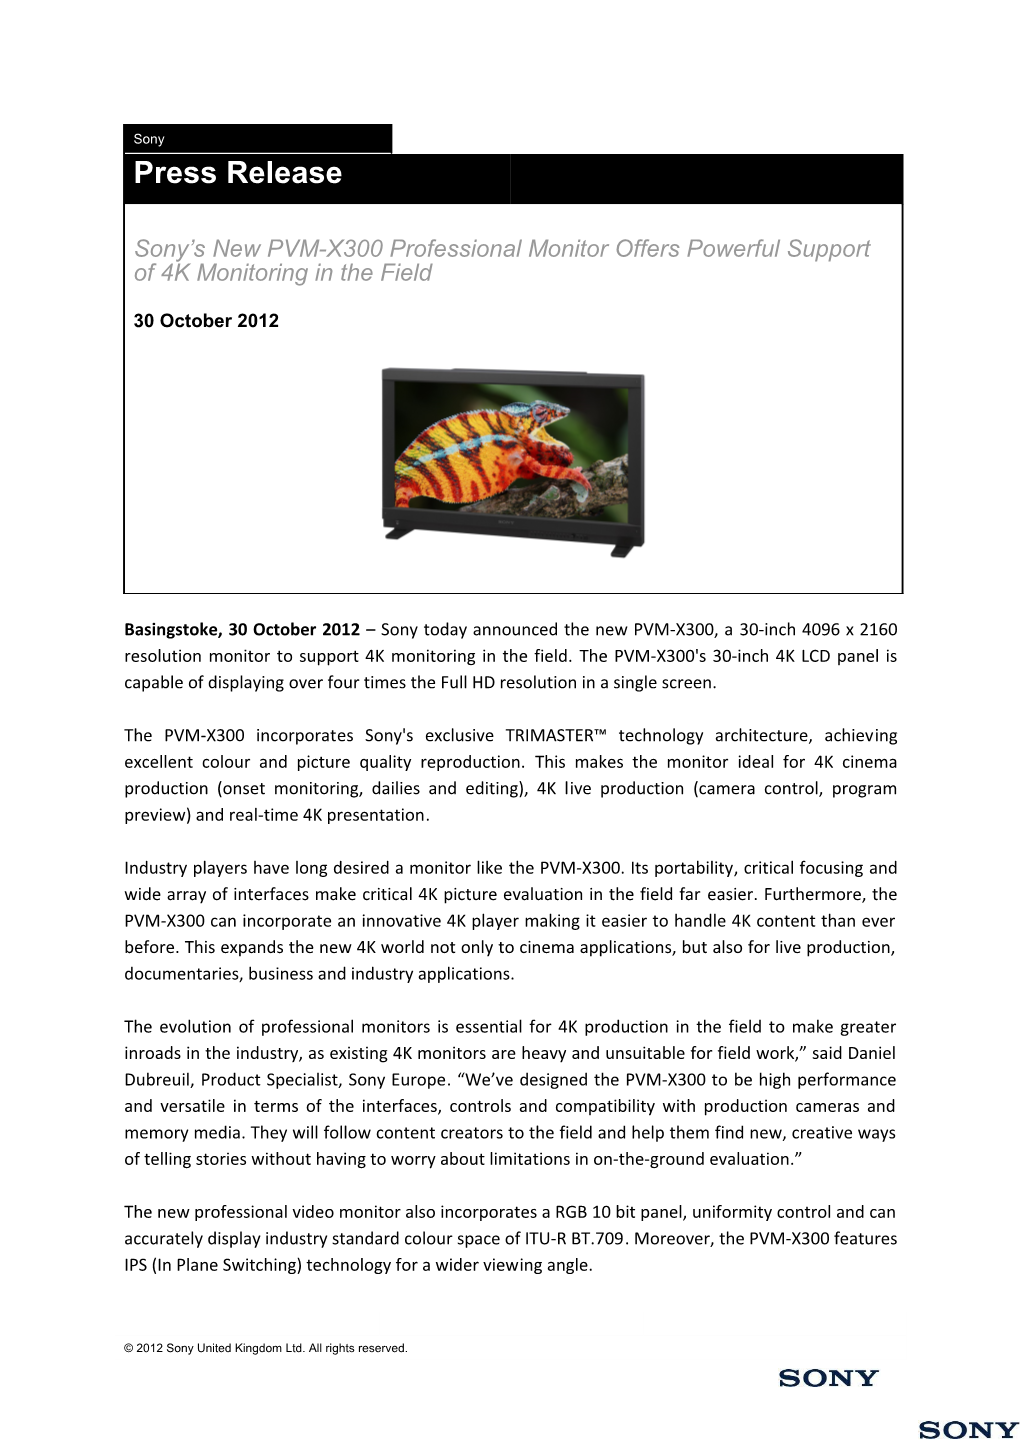 The PVM-X300 Incorporates Sony's Exclusive TRIMASTER Technology Architecture, Achieving